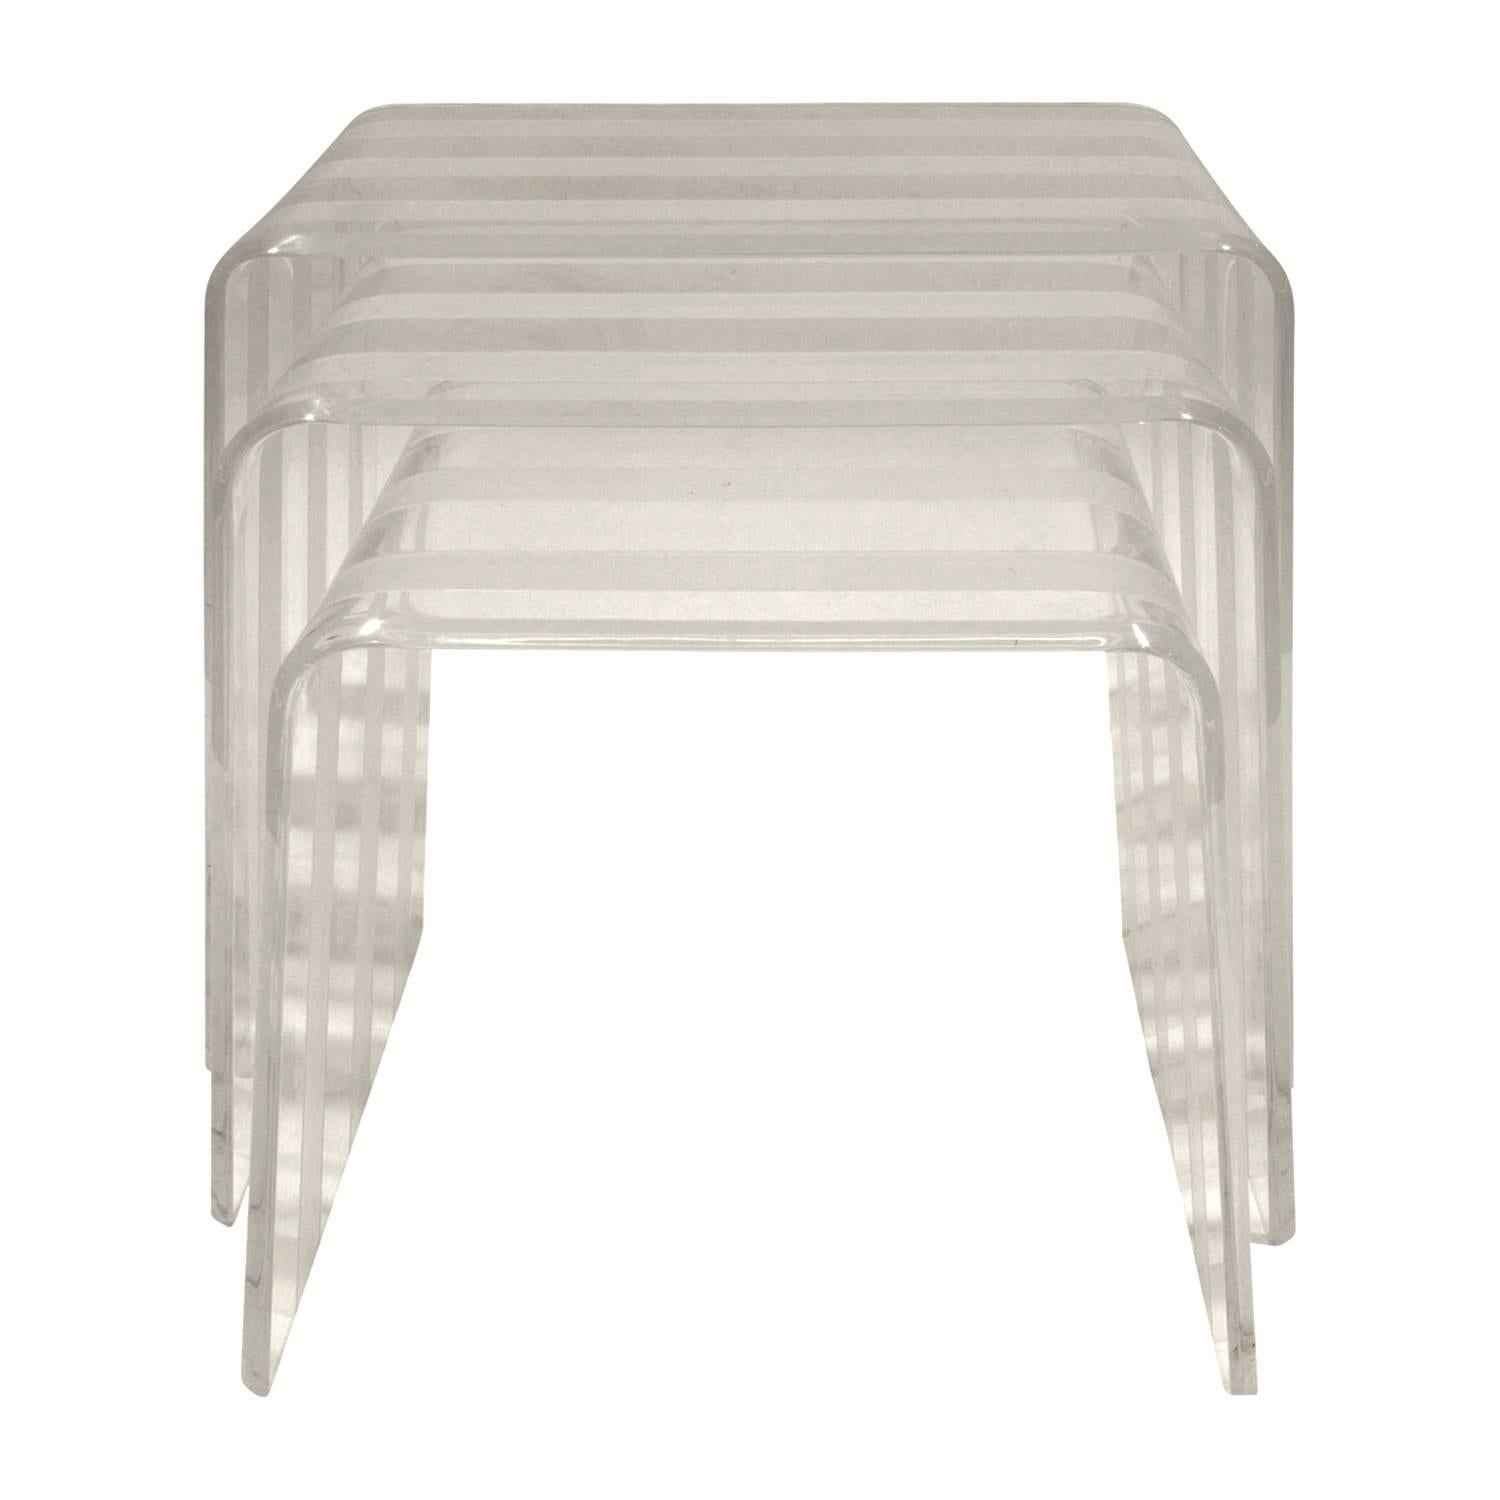 Set of three nesting table in alternating clear and sandblasted Lucite, American, 1970s.